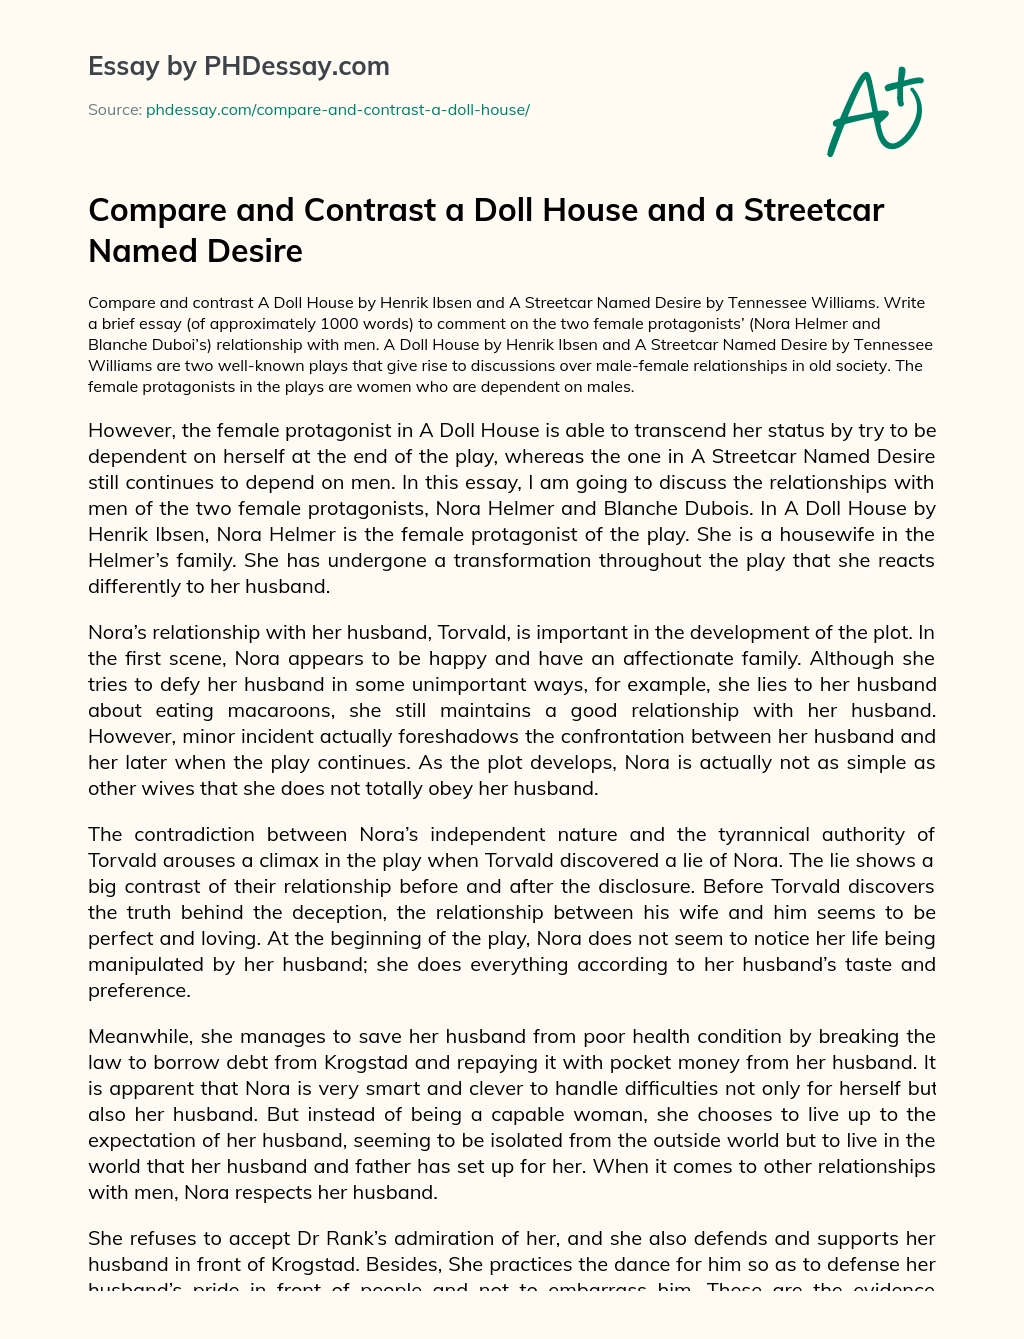 Compare and Contrast a Doll House and a Streetcar Named Desire essay